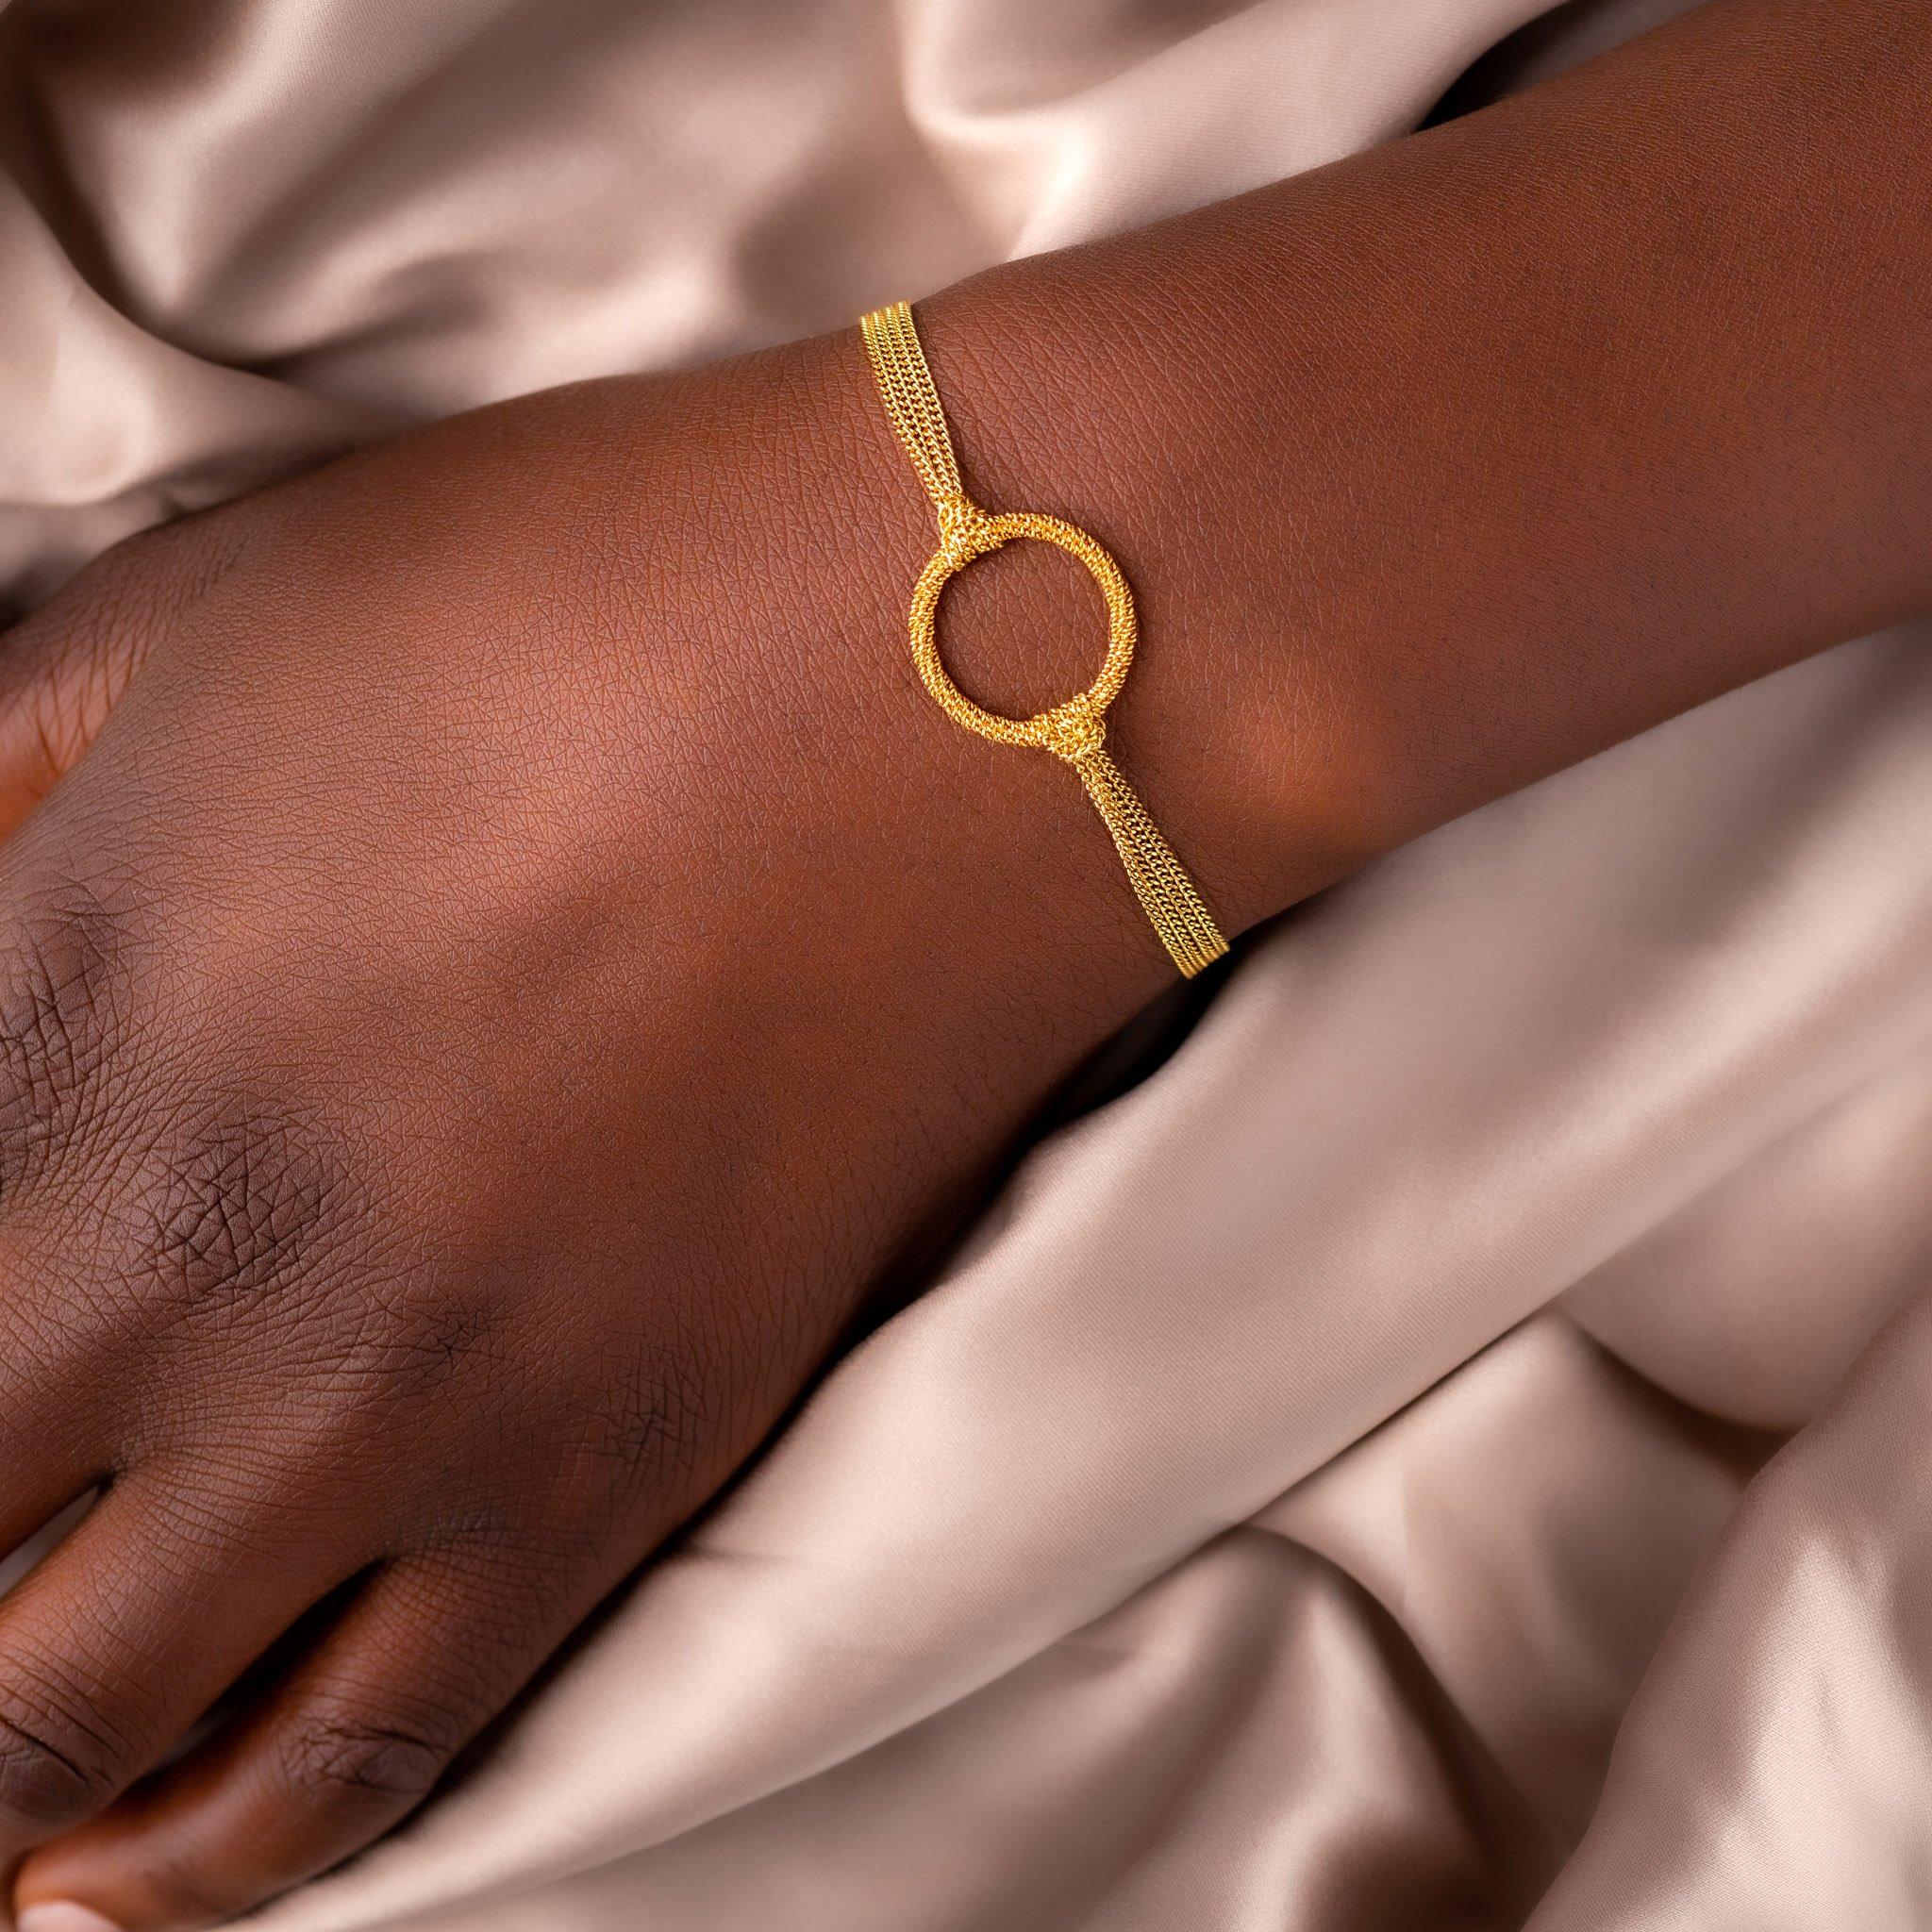 This deceptively simple bracelet has a secret: the links of its handmade, diamond-cut 18K yellow gold chains have the ability to reflect ambient light so brilliantly that you’ll think you’re wearing slender rivers of glimmering starlight. The two